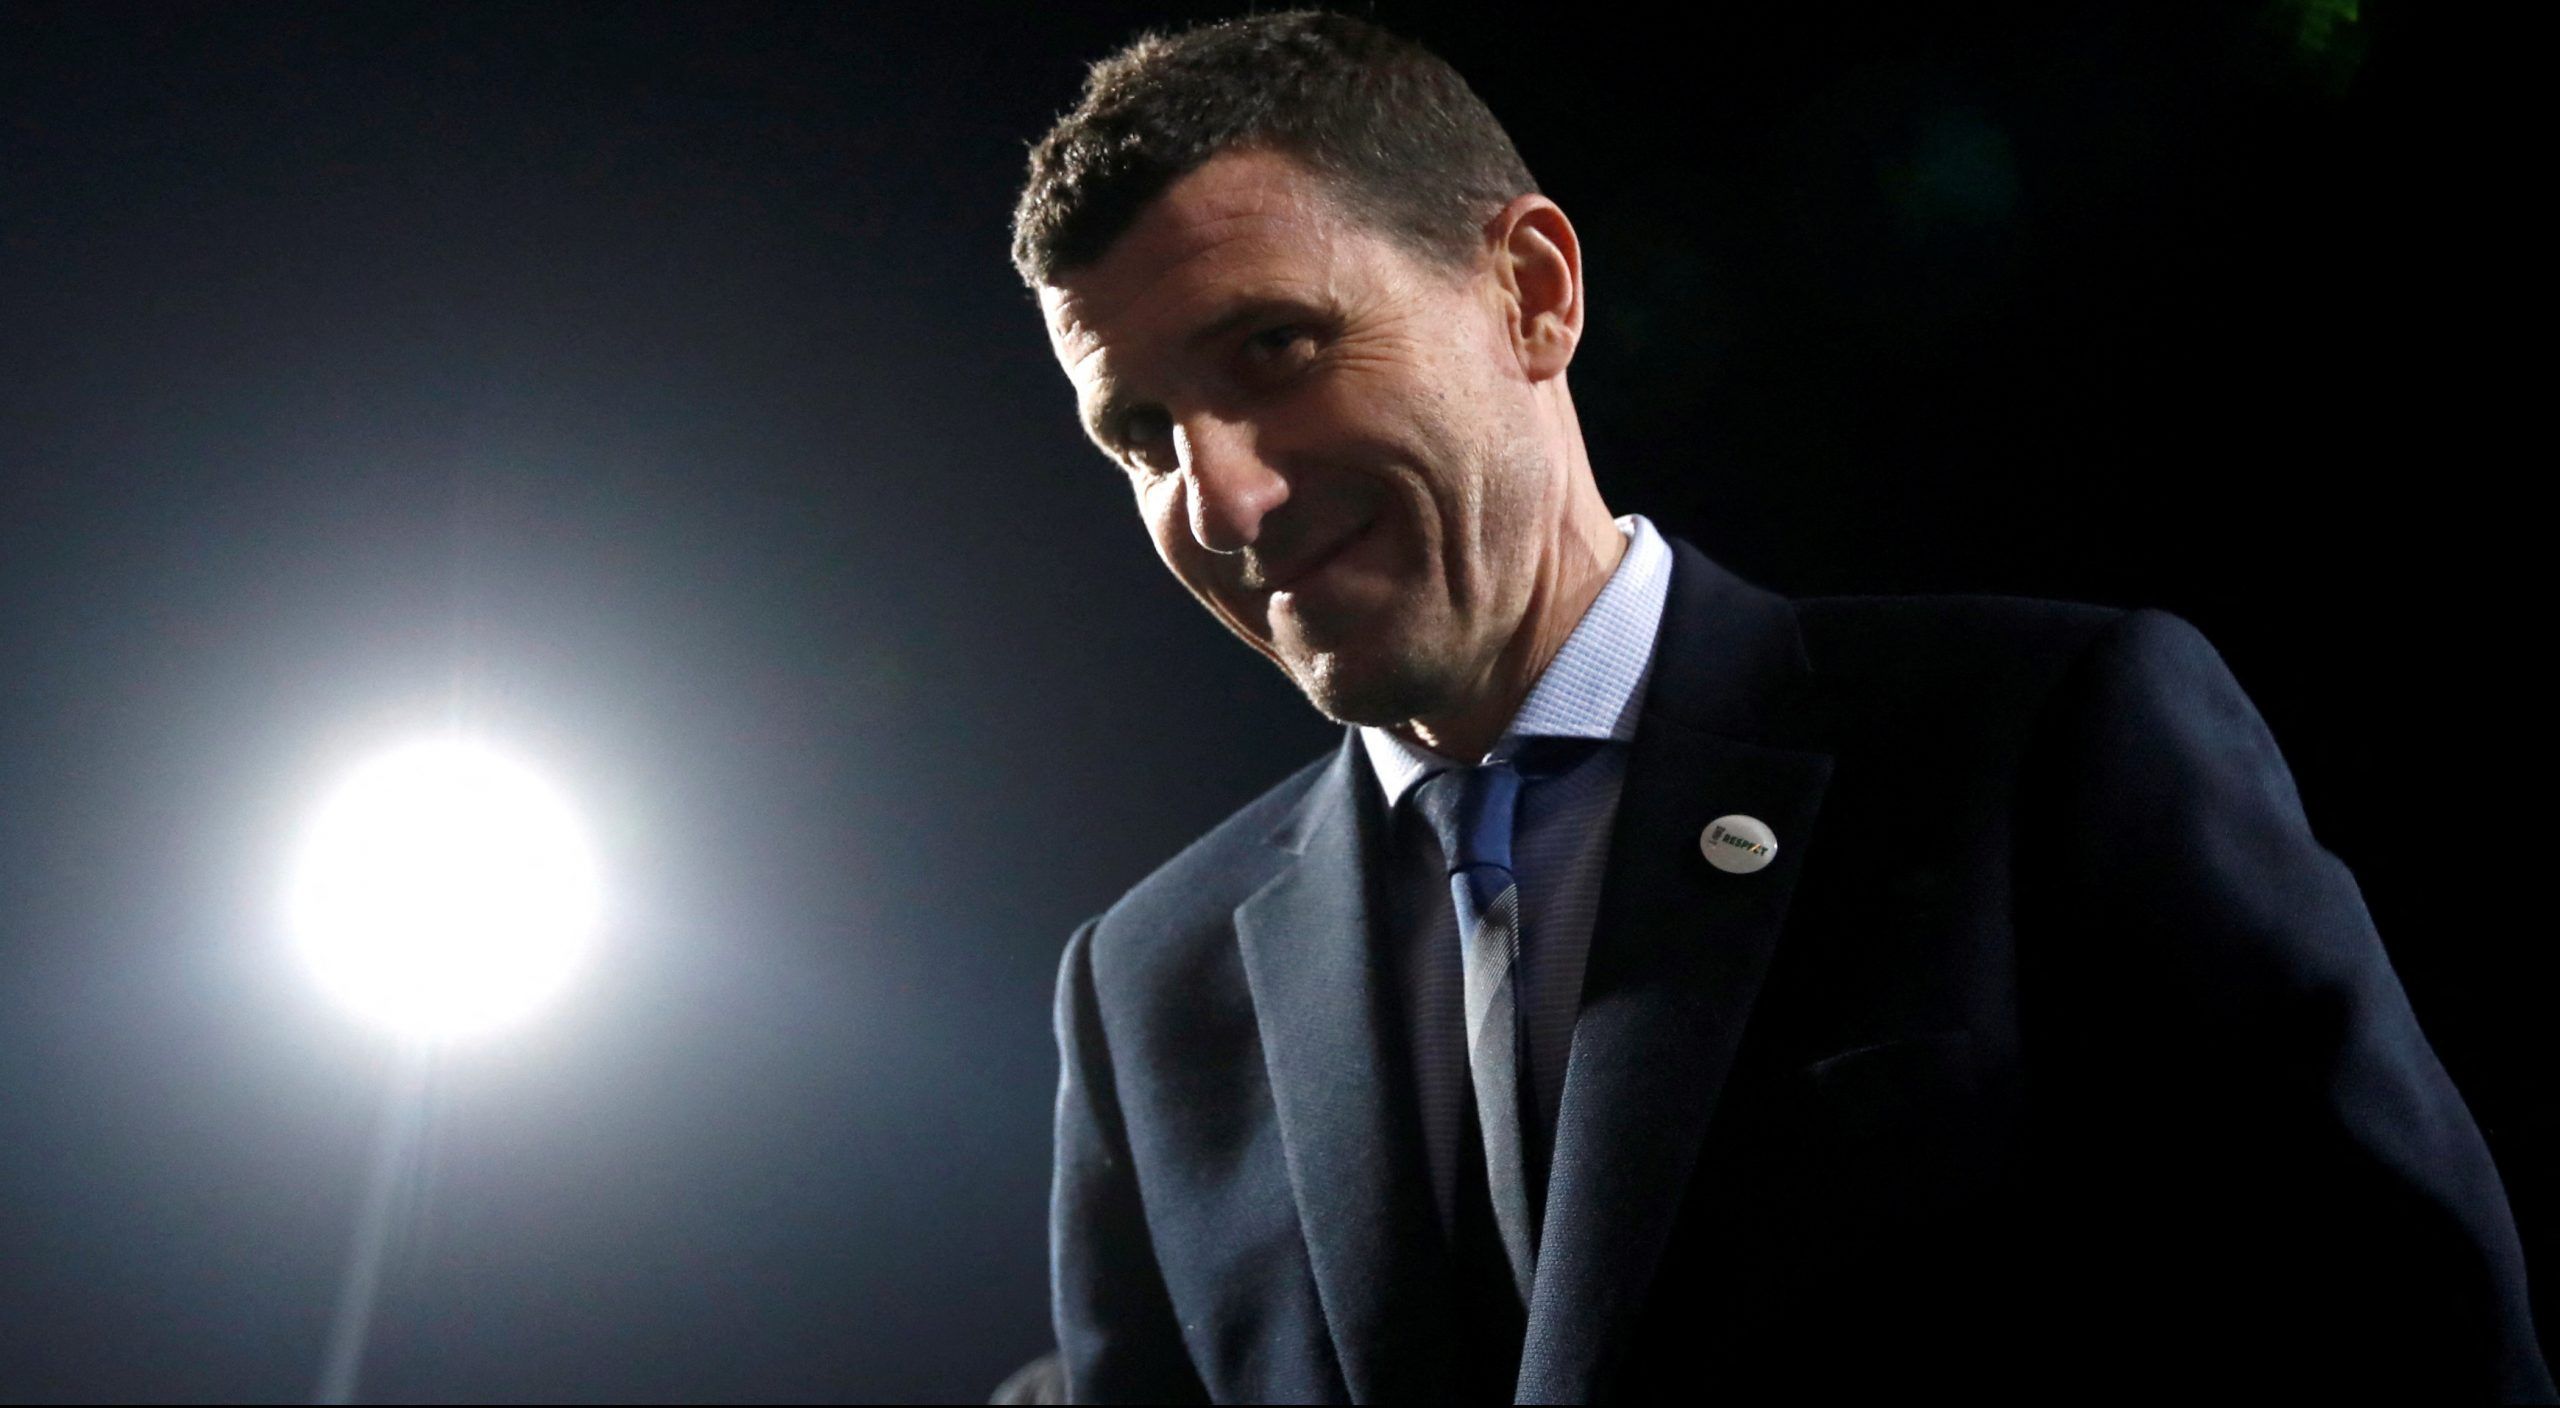 FILE PHOTO: Soccer Football - FA Cup Fifth Round - Queens Park Rangers v Watford - Loftus Road, London, Britain - February 15, 2019  Watford manager Javi Gracia before the match   REUTERS/David Klein/File Photo